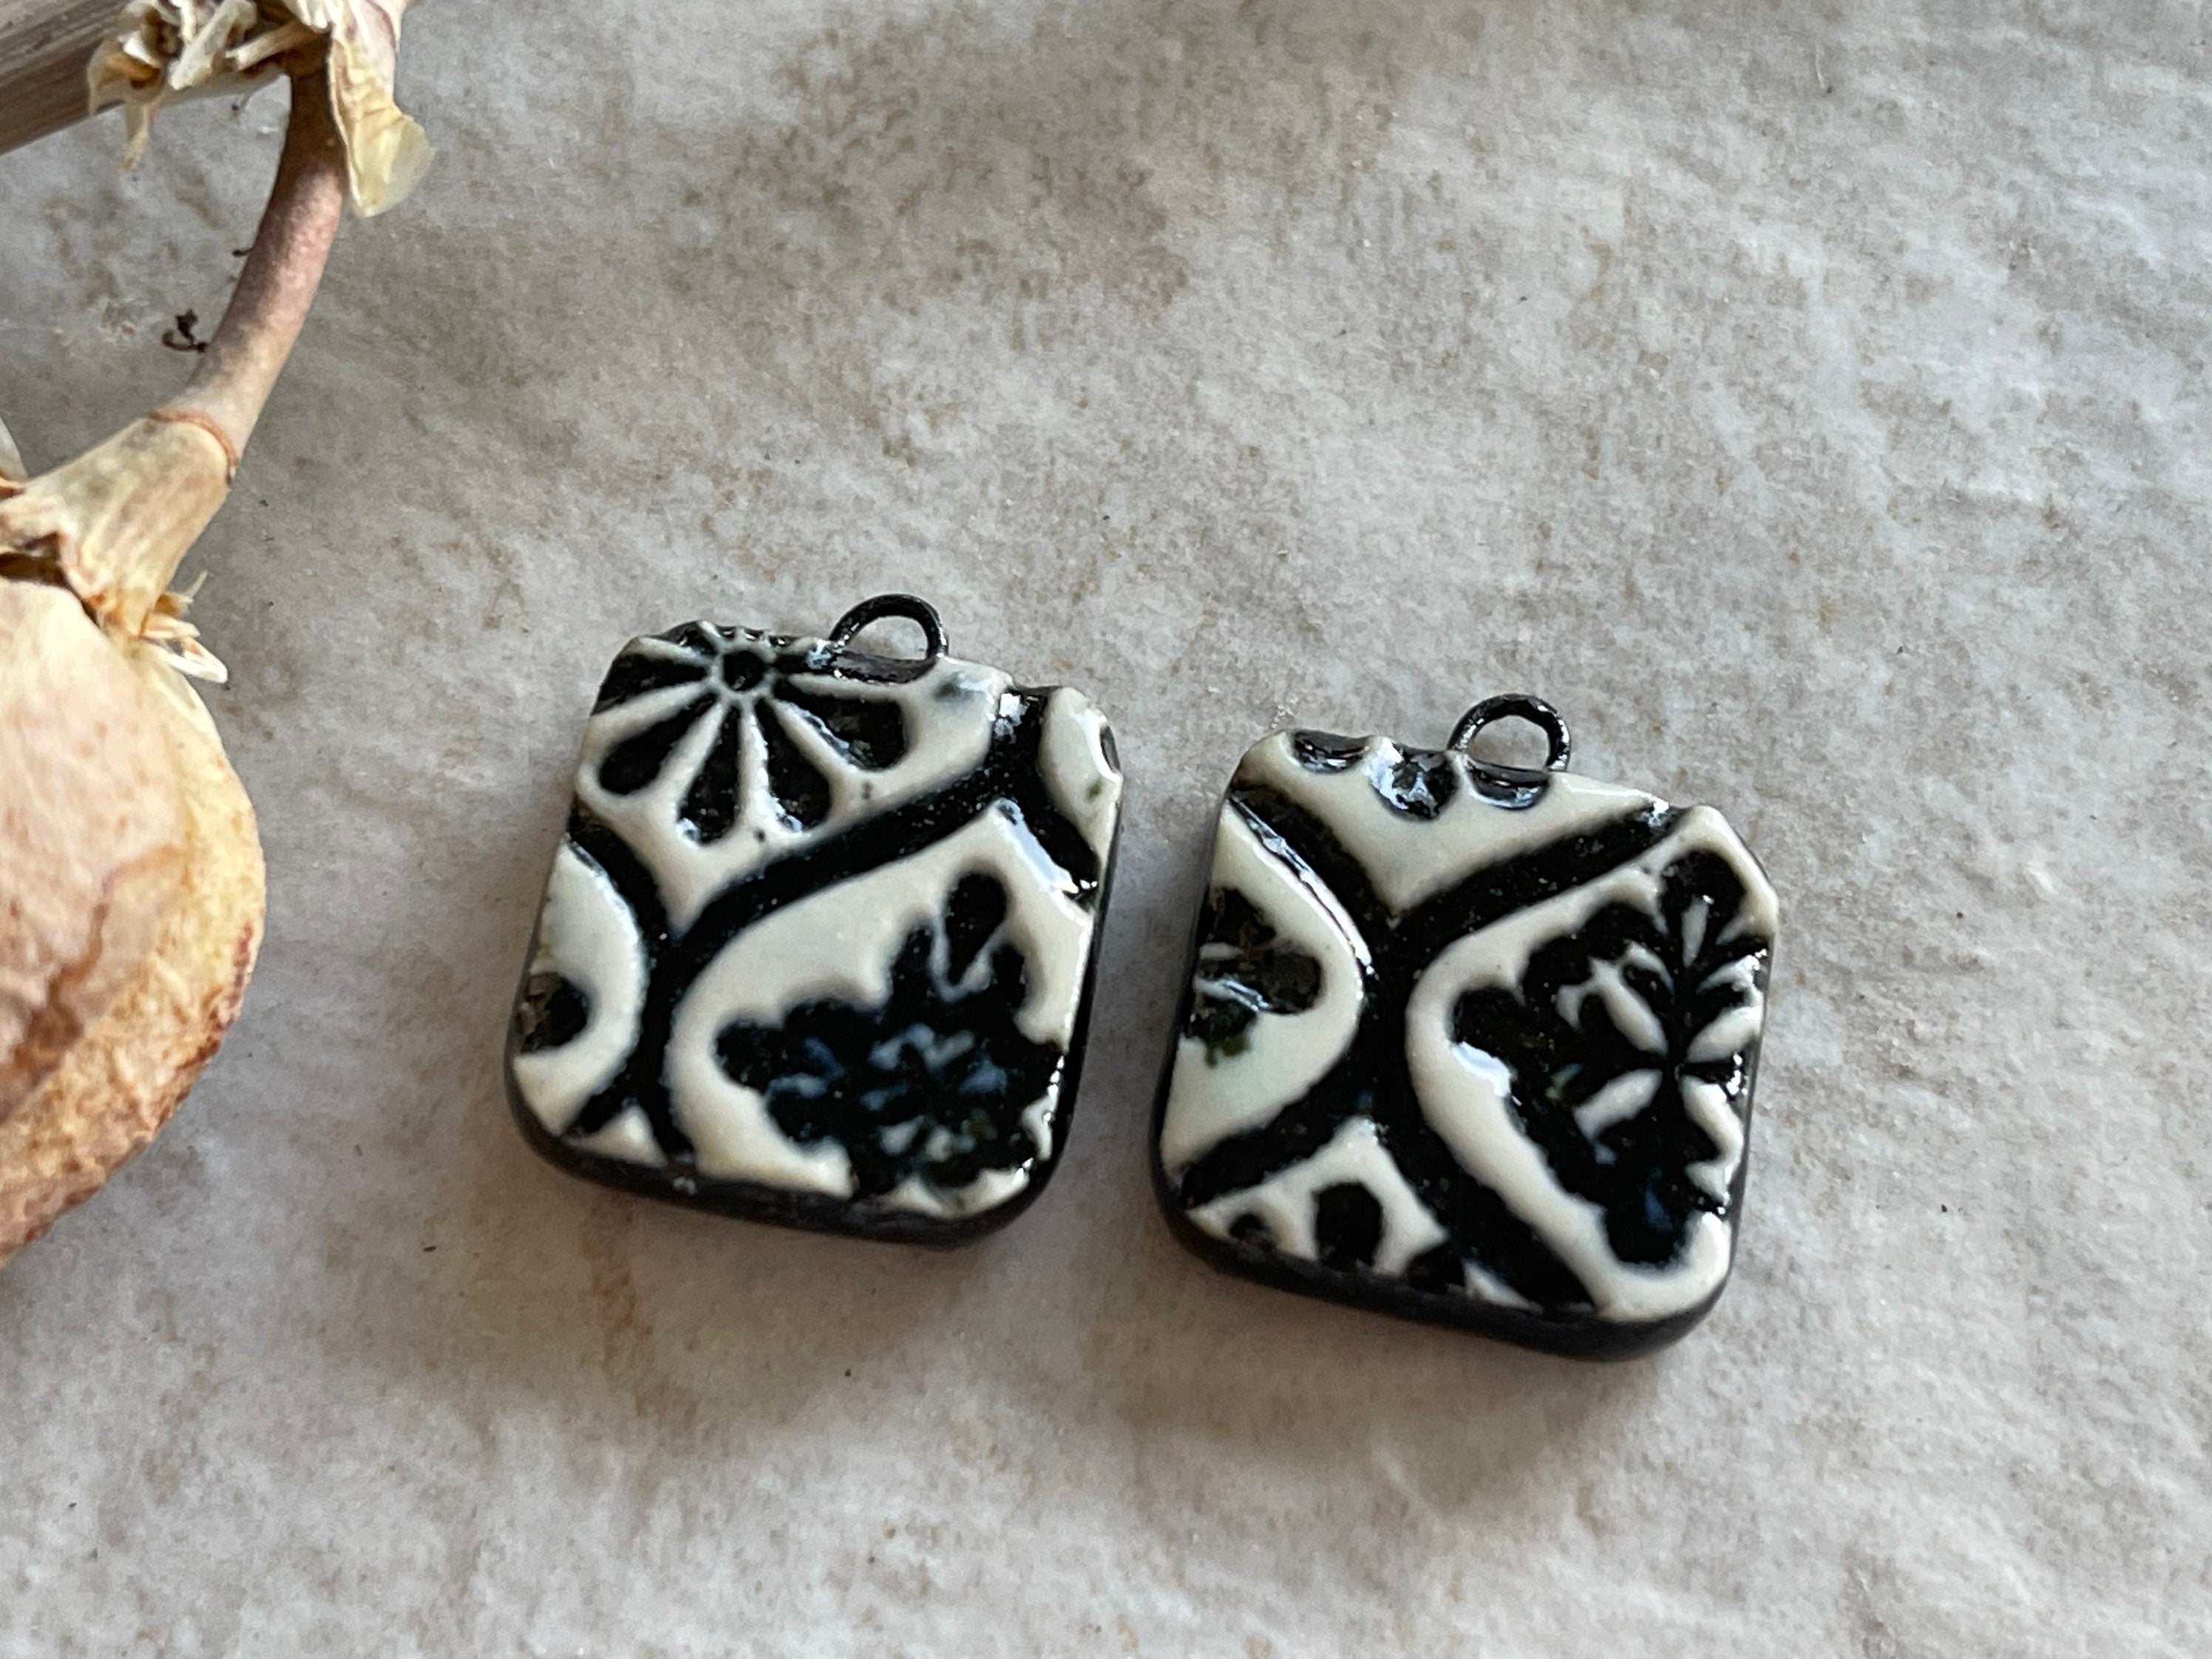 Black and White Italian Tile, Black Earring Bead Pair, Porcelain Ceramic Charms, Jewelry Making Components, Beading Handmade